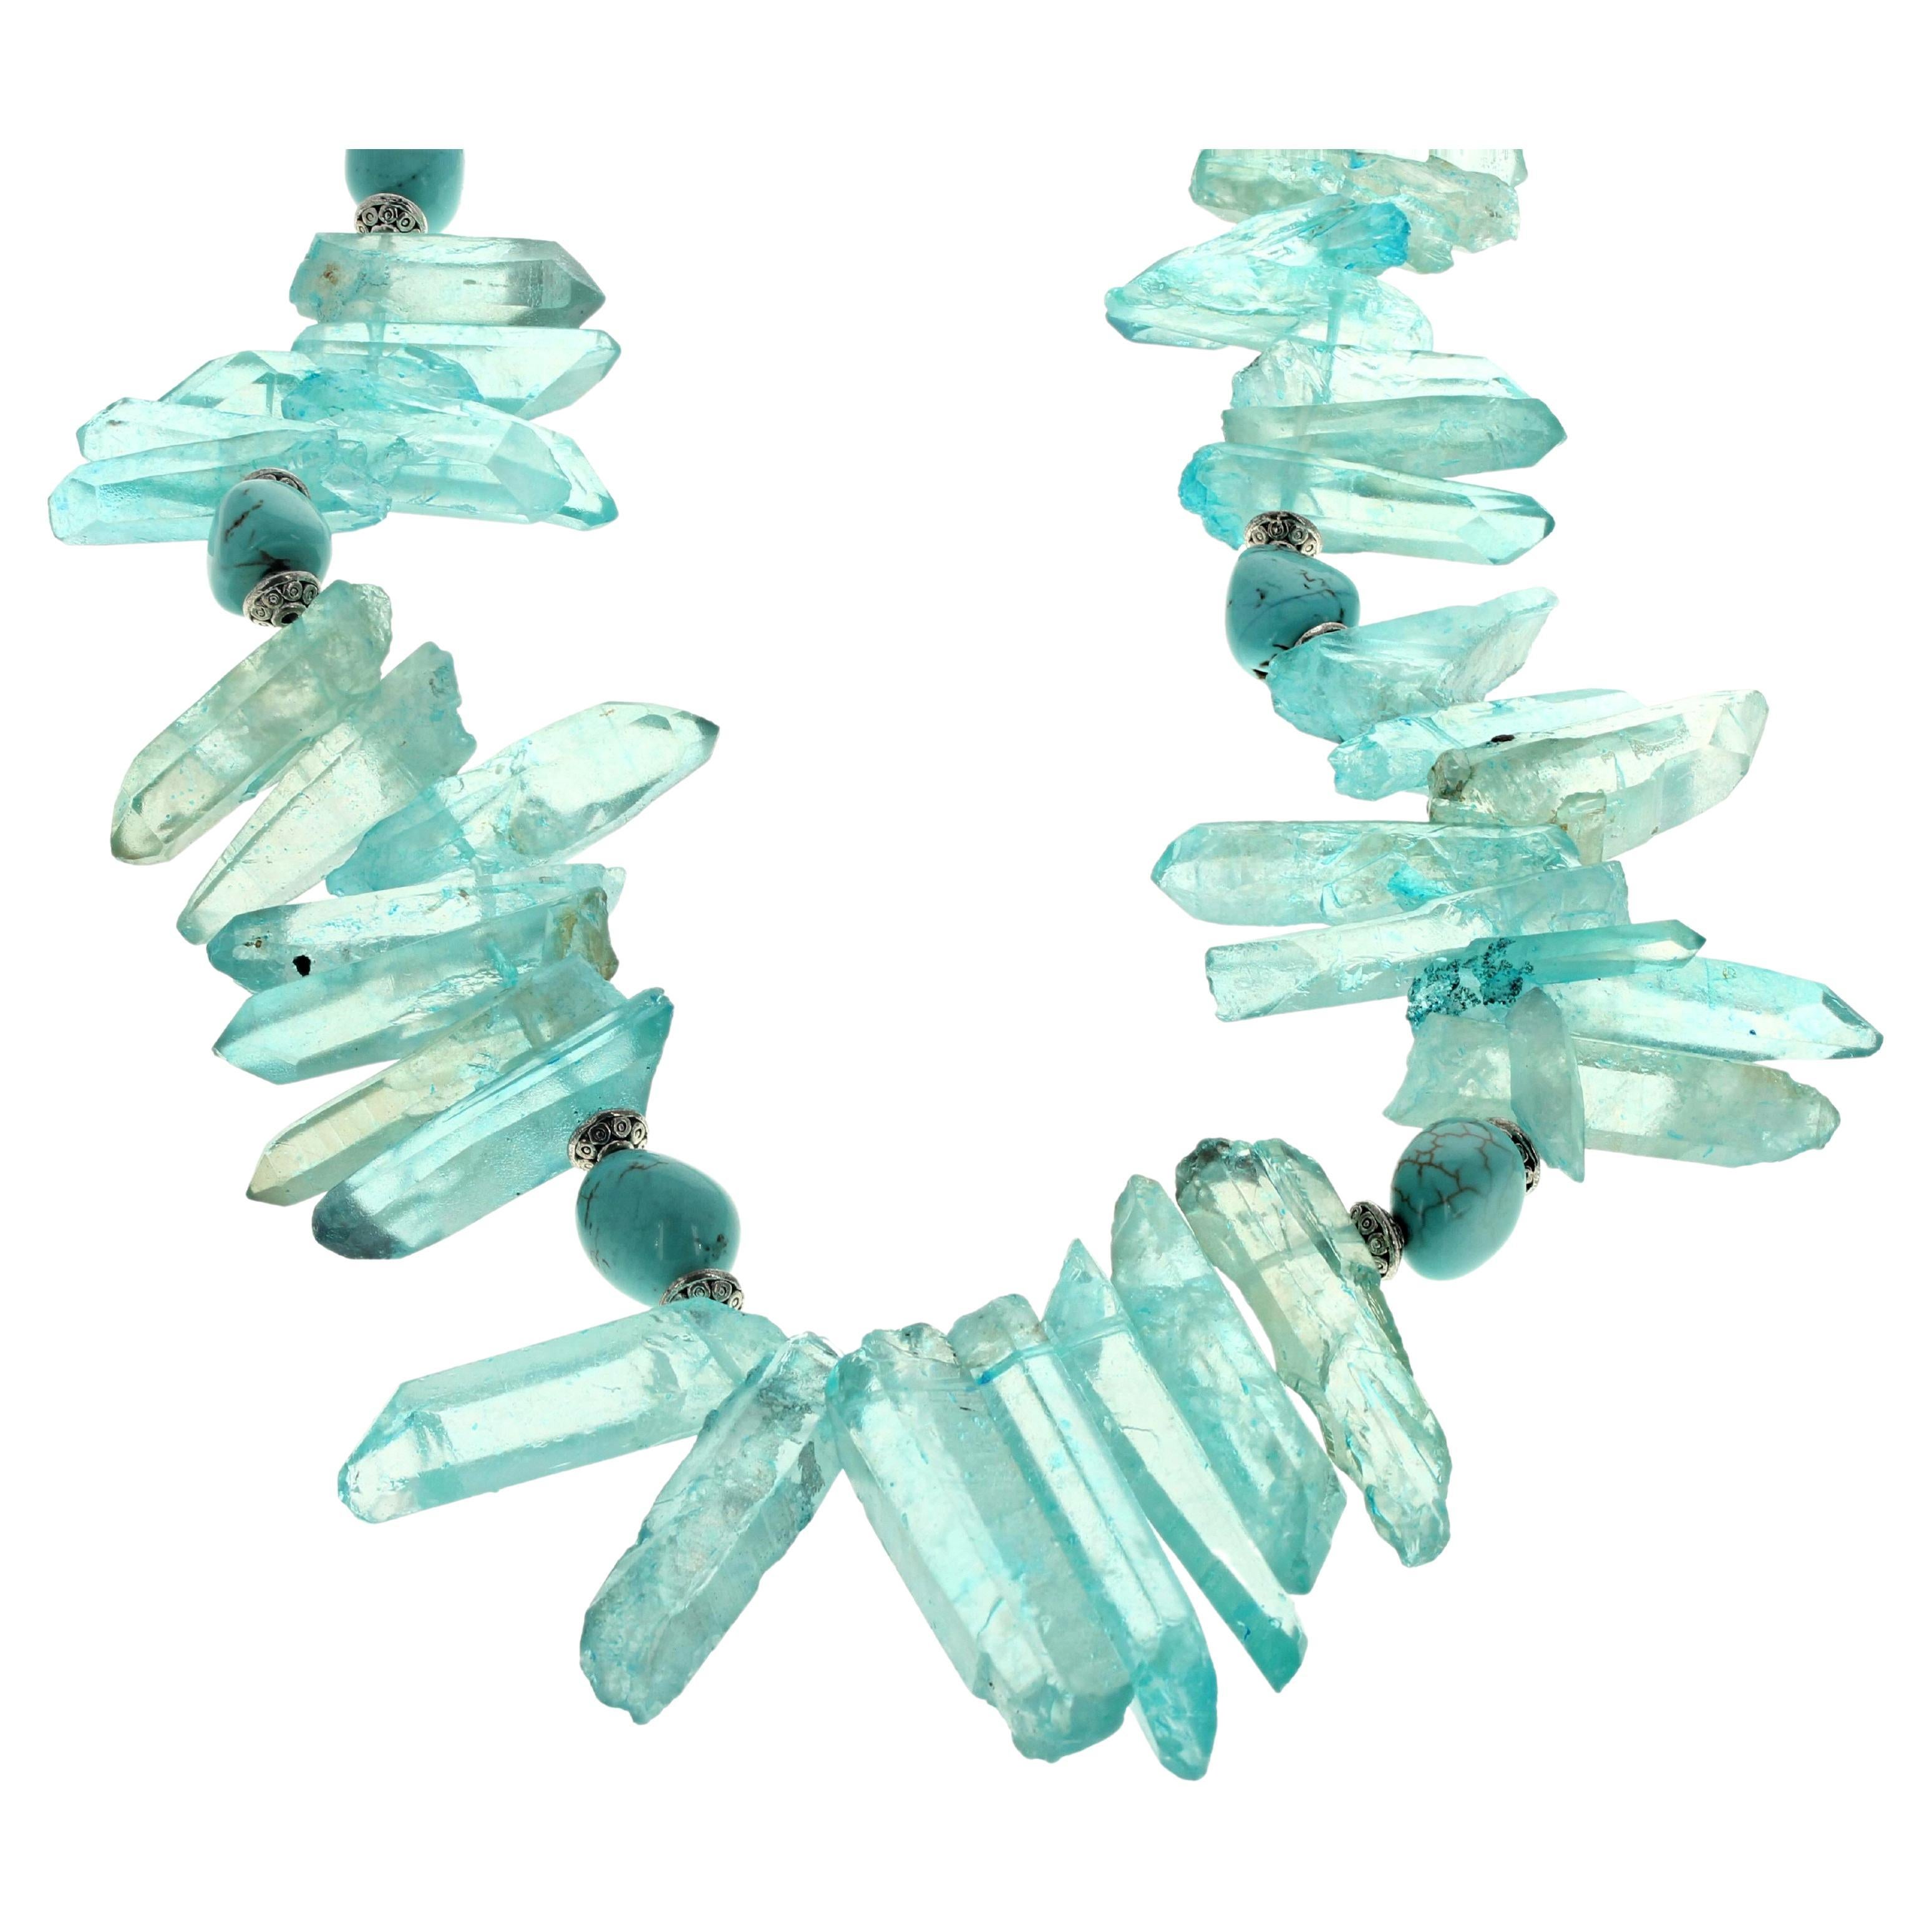 This hugely dramatic flippy-floppy 21 inch long Aquamarine necklace stands out around your neck very dramatically.  The longest of these real Aquamarines is approximately 40.5mm x 8mm thick.  The Turquoise are real from the mine in Arizona.  The